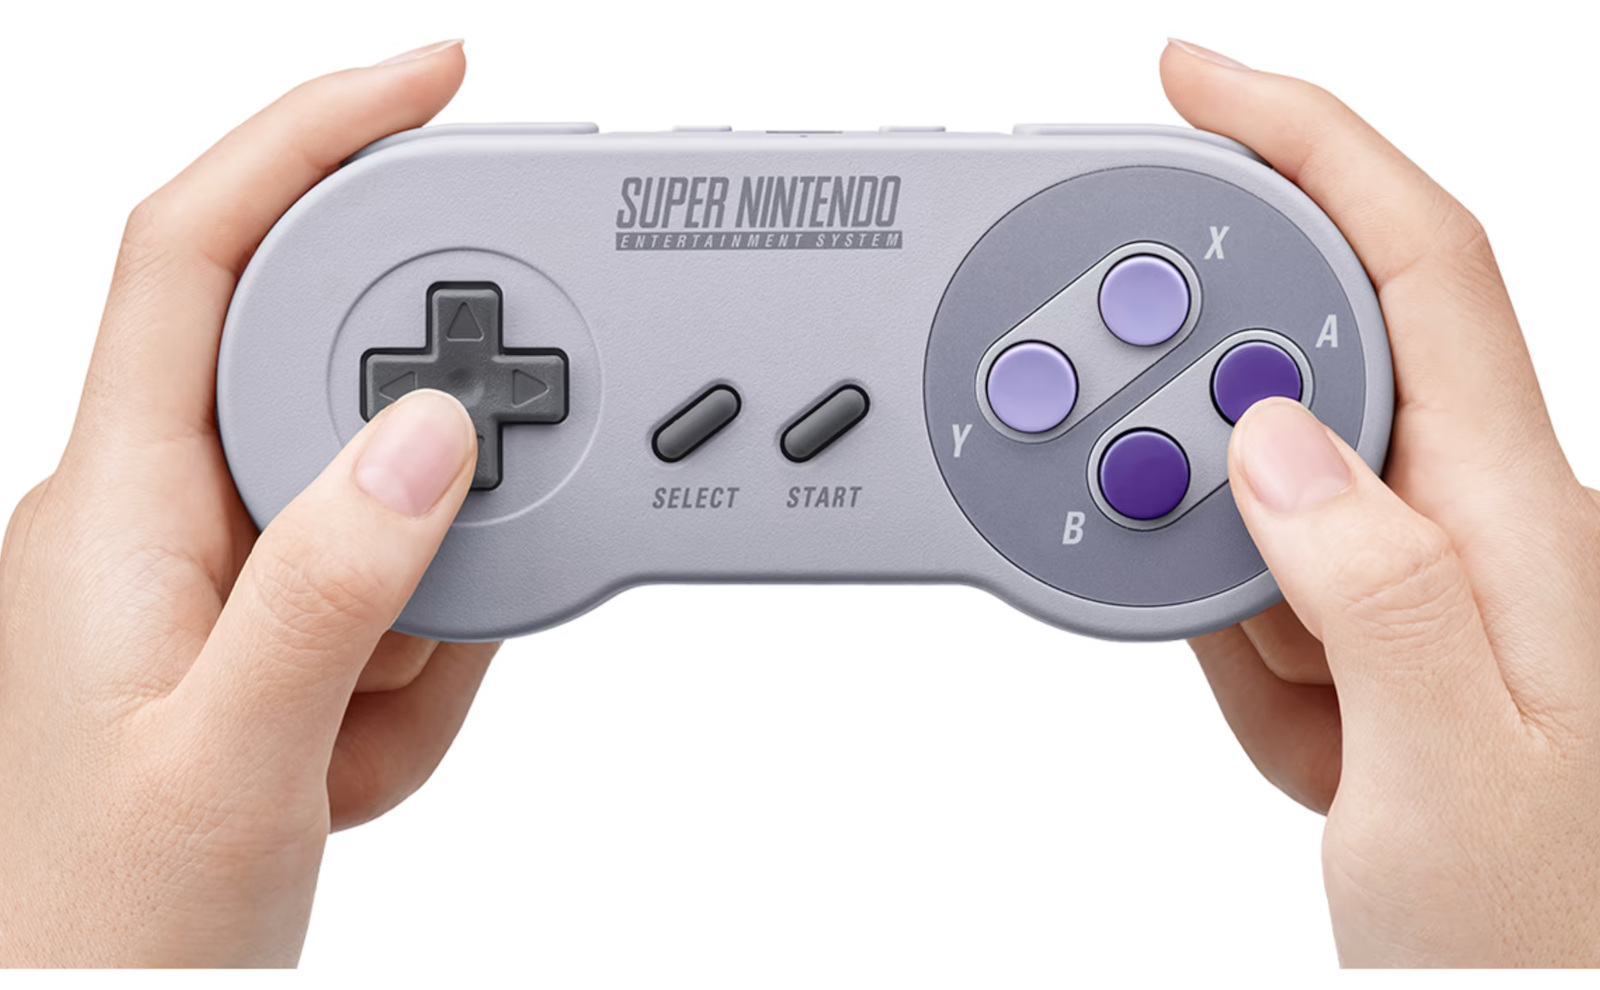 Nintendo's retro controllers now work on iPhone, iPad, Apple TV and Mac |  Engadget